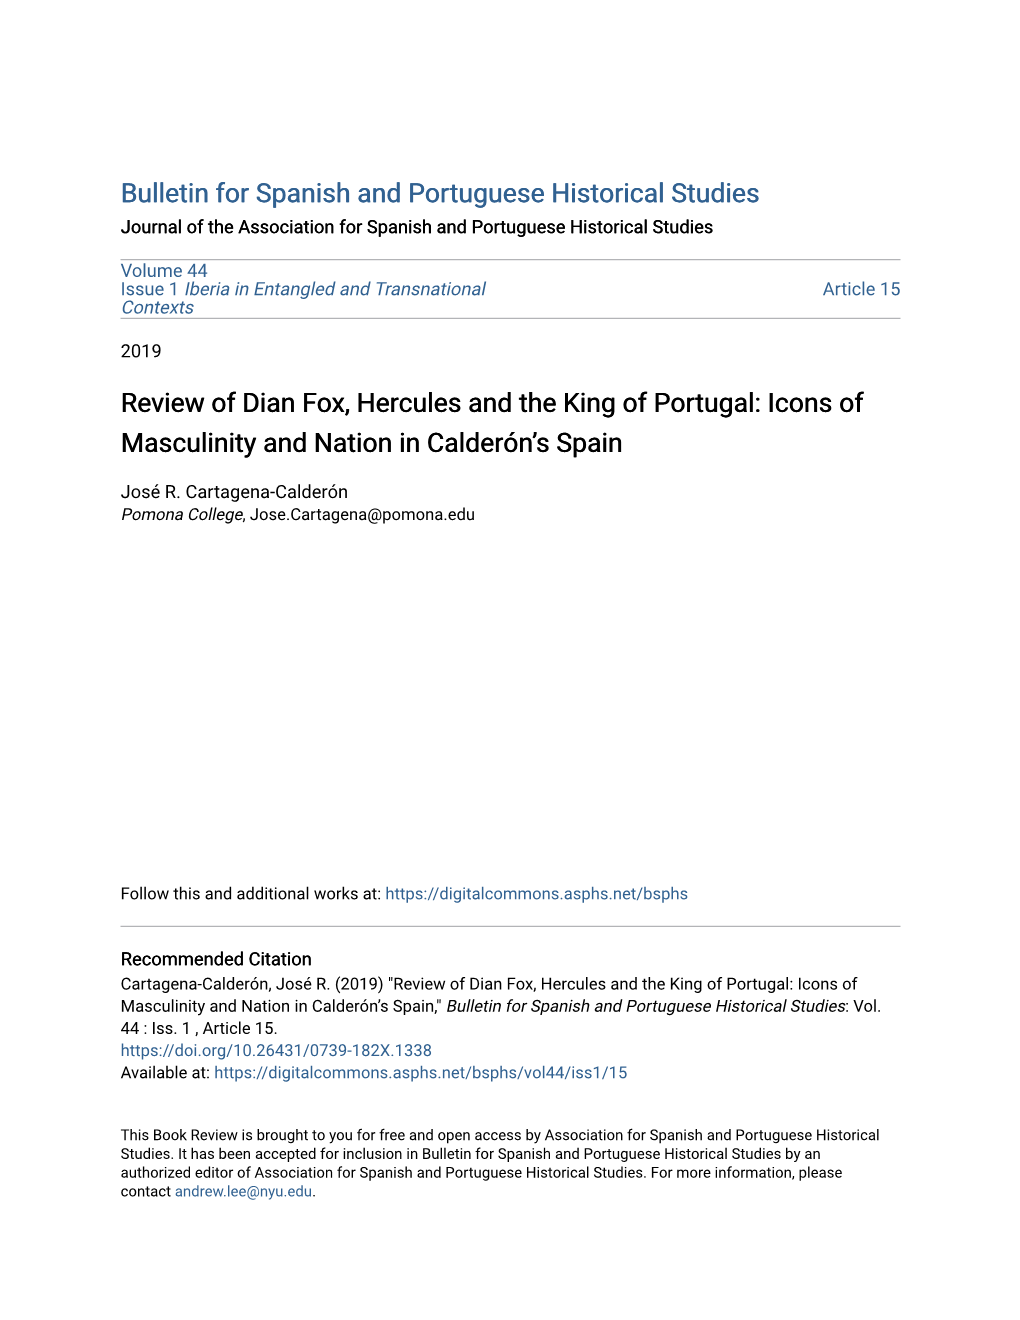 Review of Dian Fox, Hercules and the King of Portugal: Icons of Masculinity and Nation in Calderón’S Spain